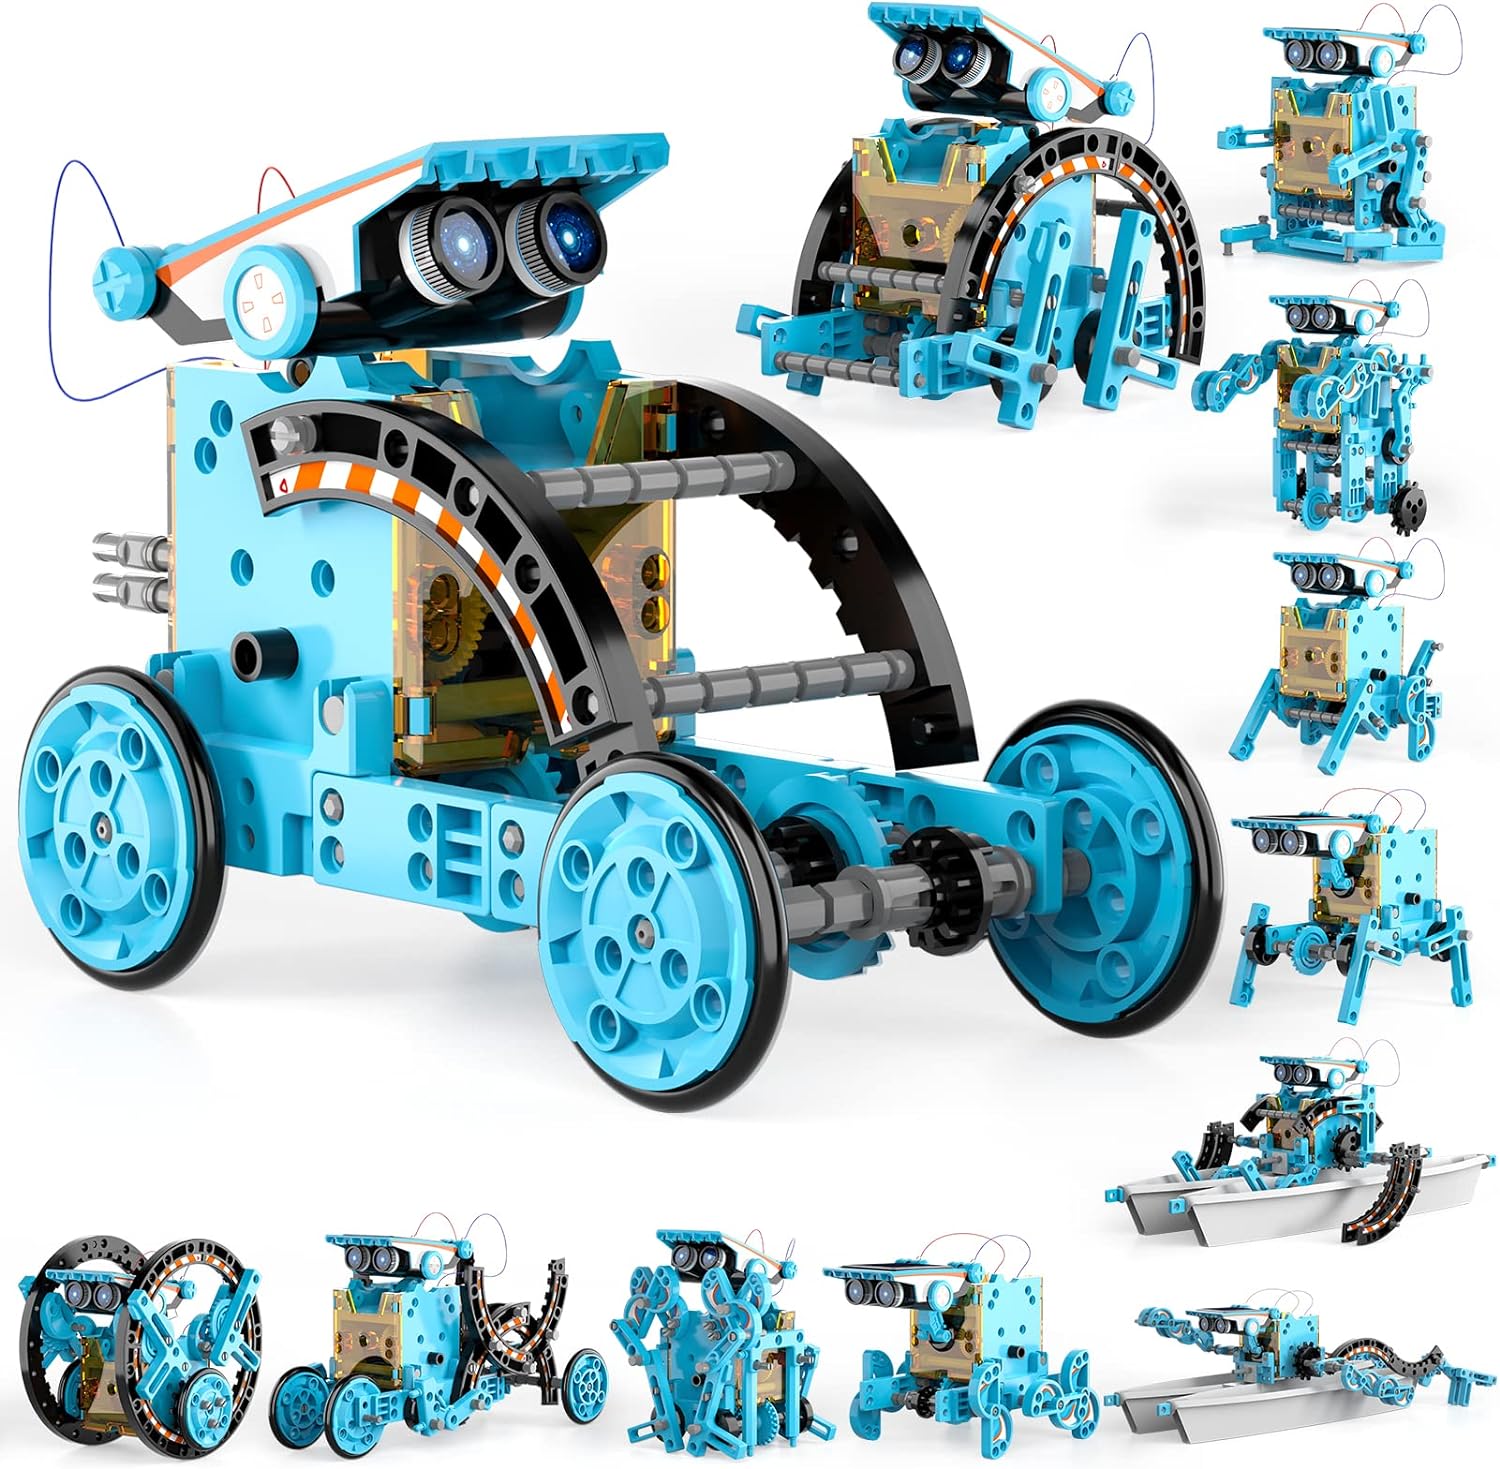 I purchased this robot kit for my six year old son to assemble. The directions were obviously too tedious for him so we watched a few YouTube videos that explained how to build the robot. It was so simple that my 6 year old refused to let me help with building the roly-poly robot. I literally wasn't allowed to touch it. After about an hour and a half, he built the robot on his own (he only cut out the parts as needed--with child scissors) The solar component was a bit weak and so the robot only 